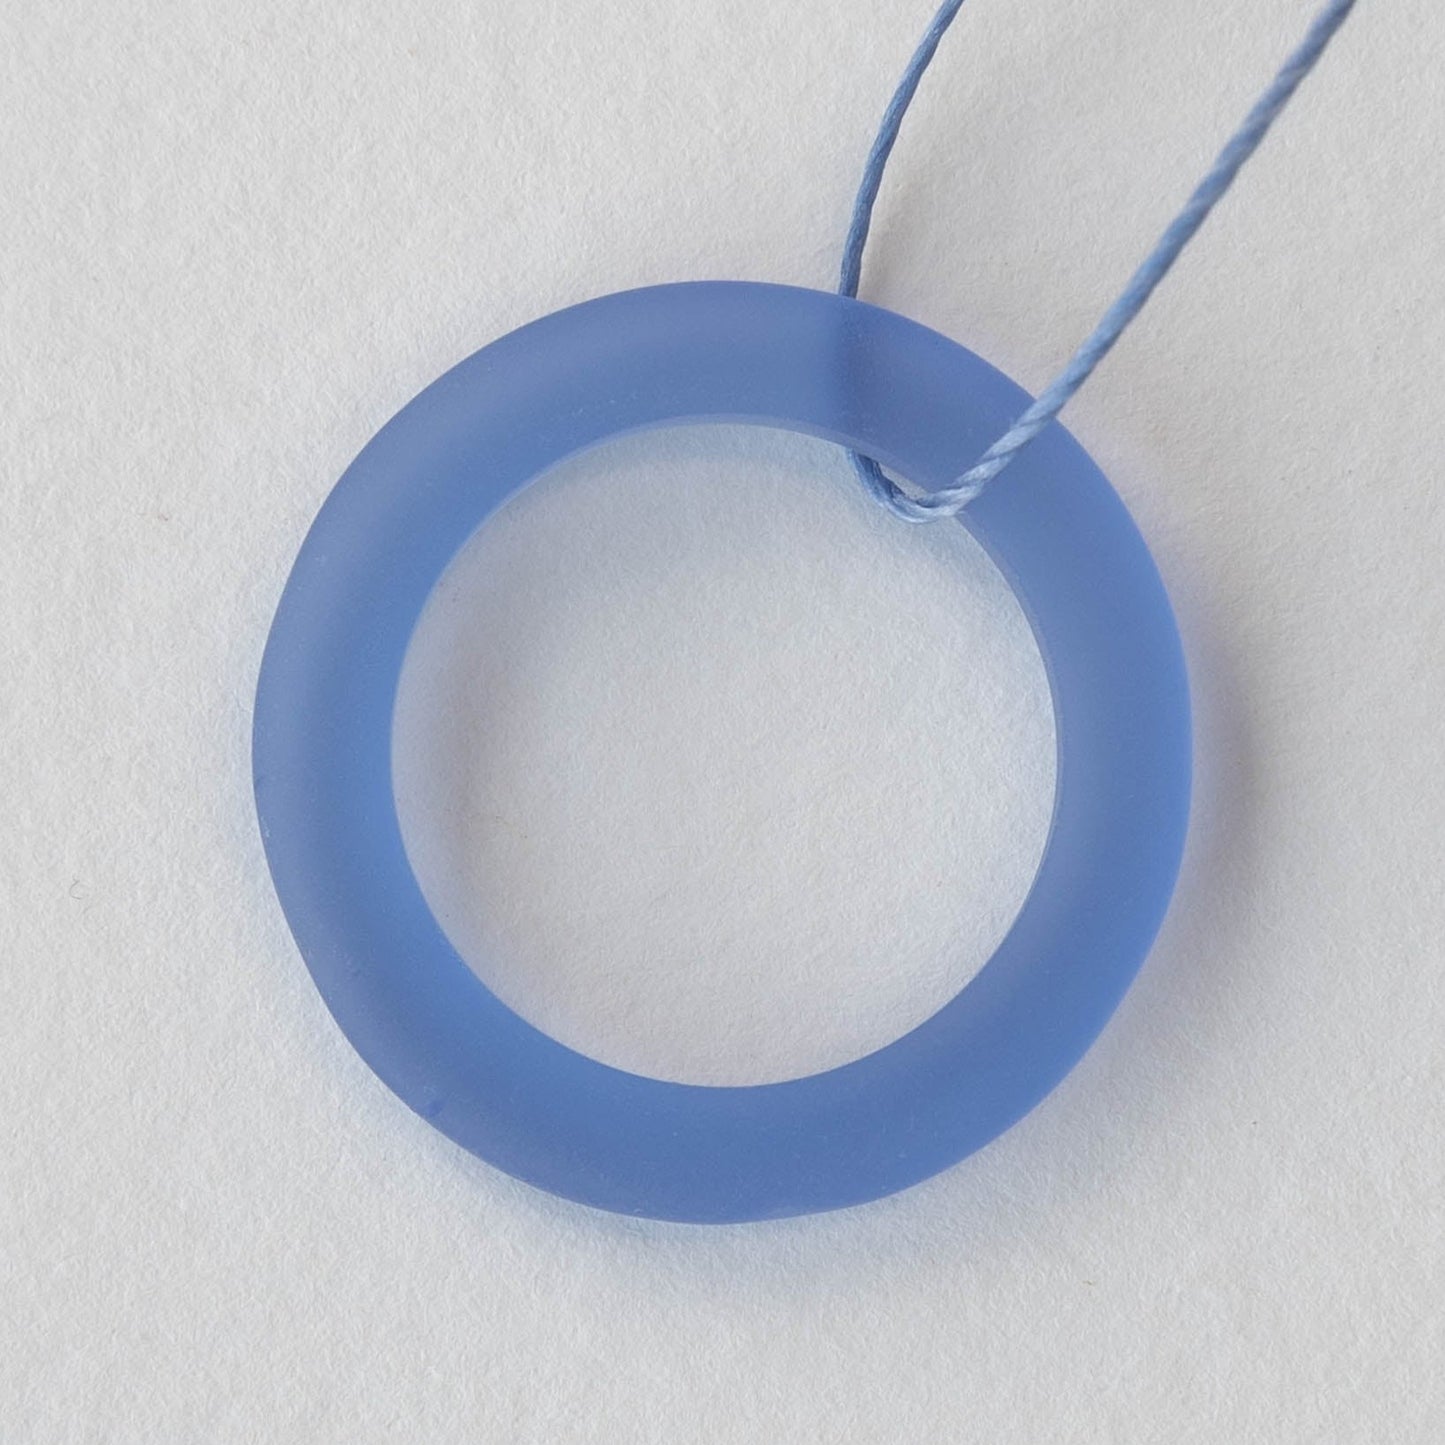 27mm Frosted Glass Rings - Sapphire Blue - 2 Rings